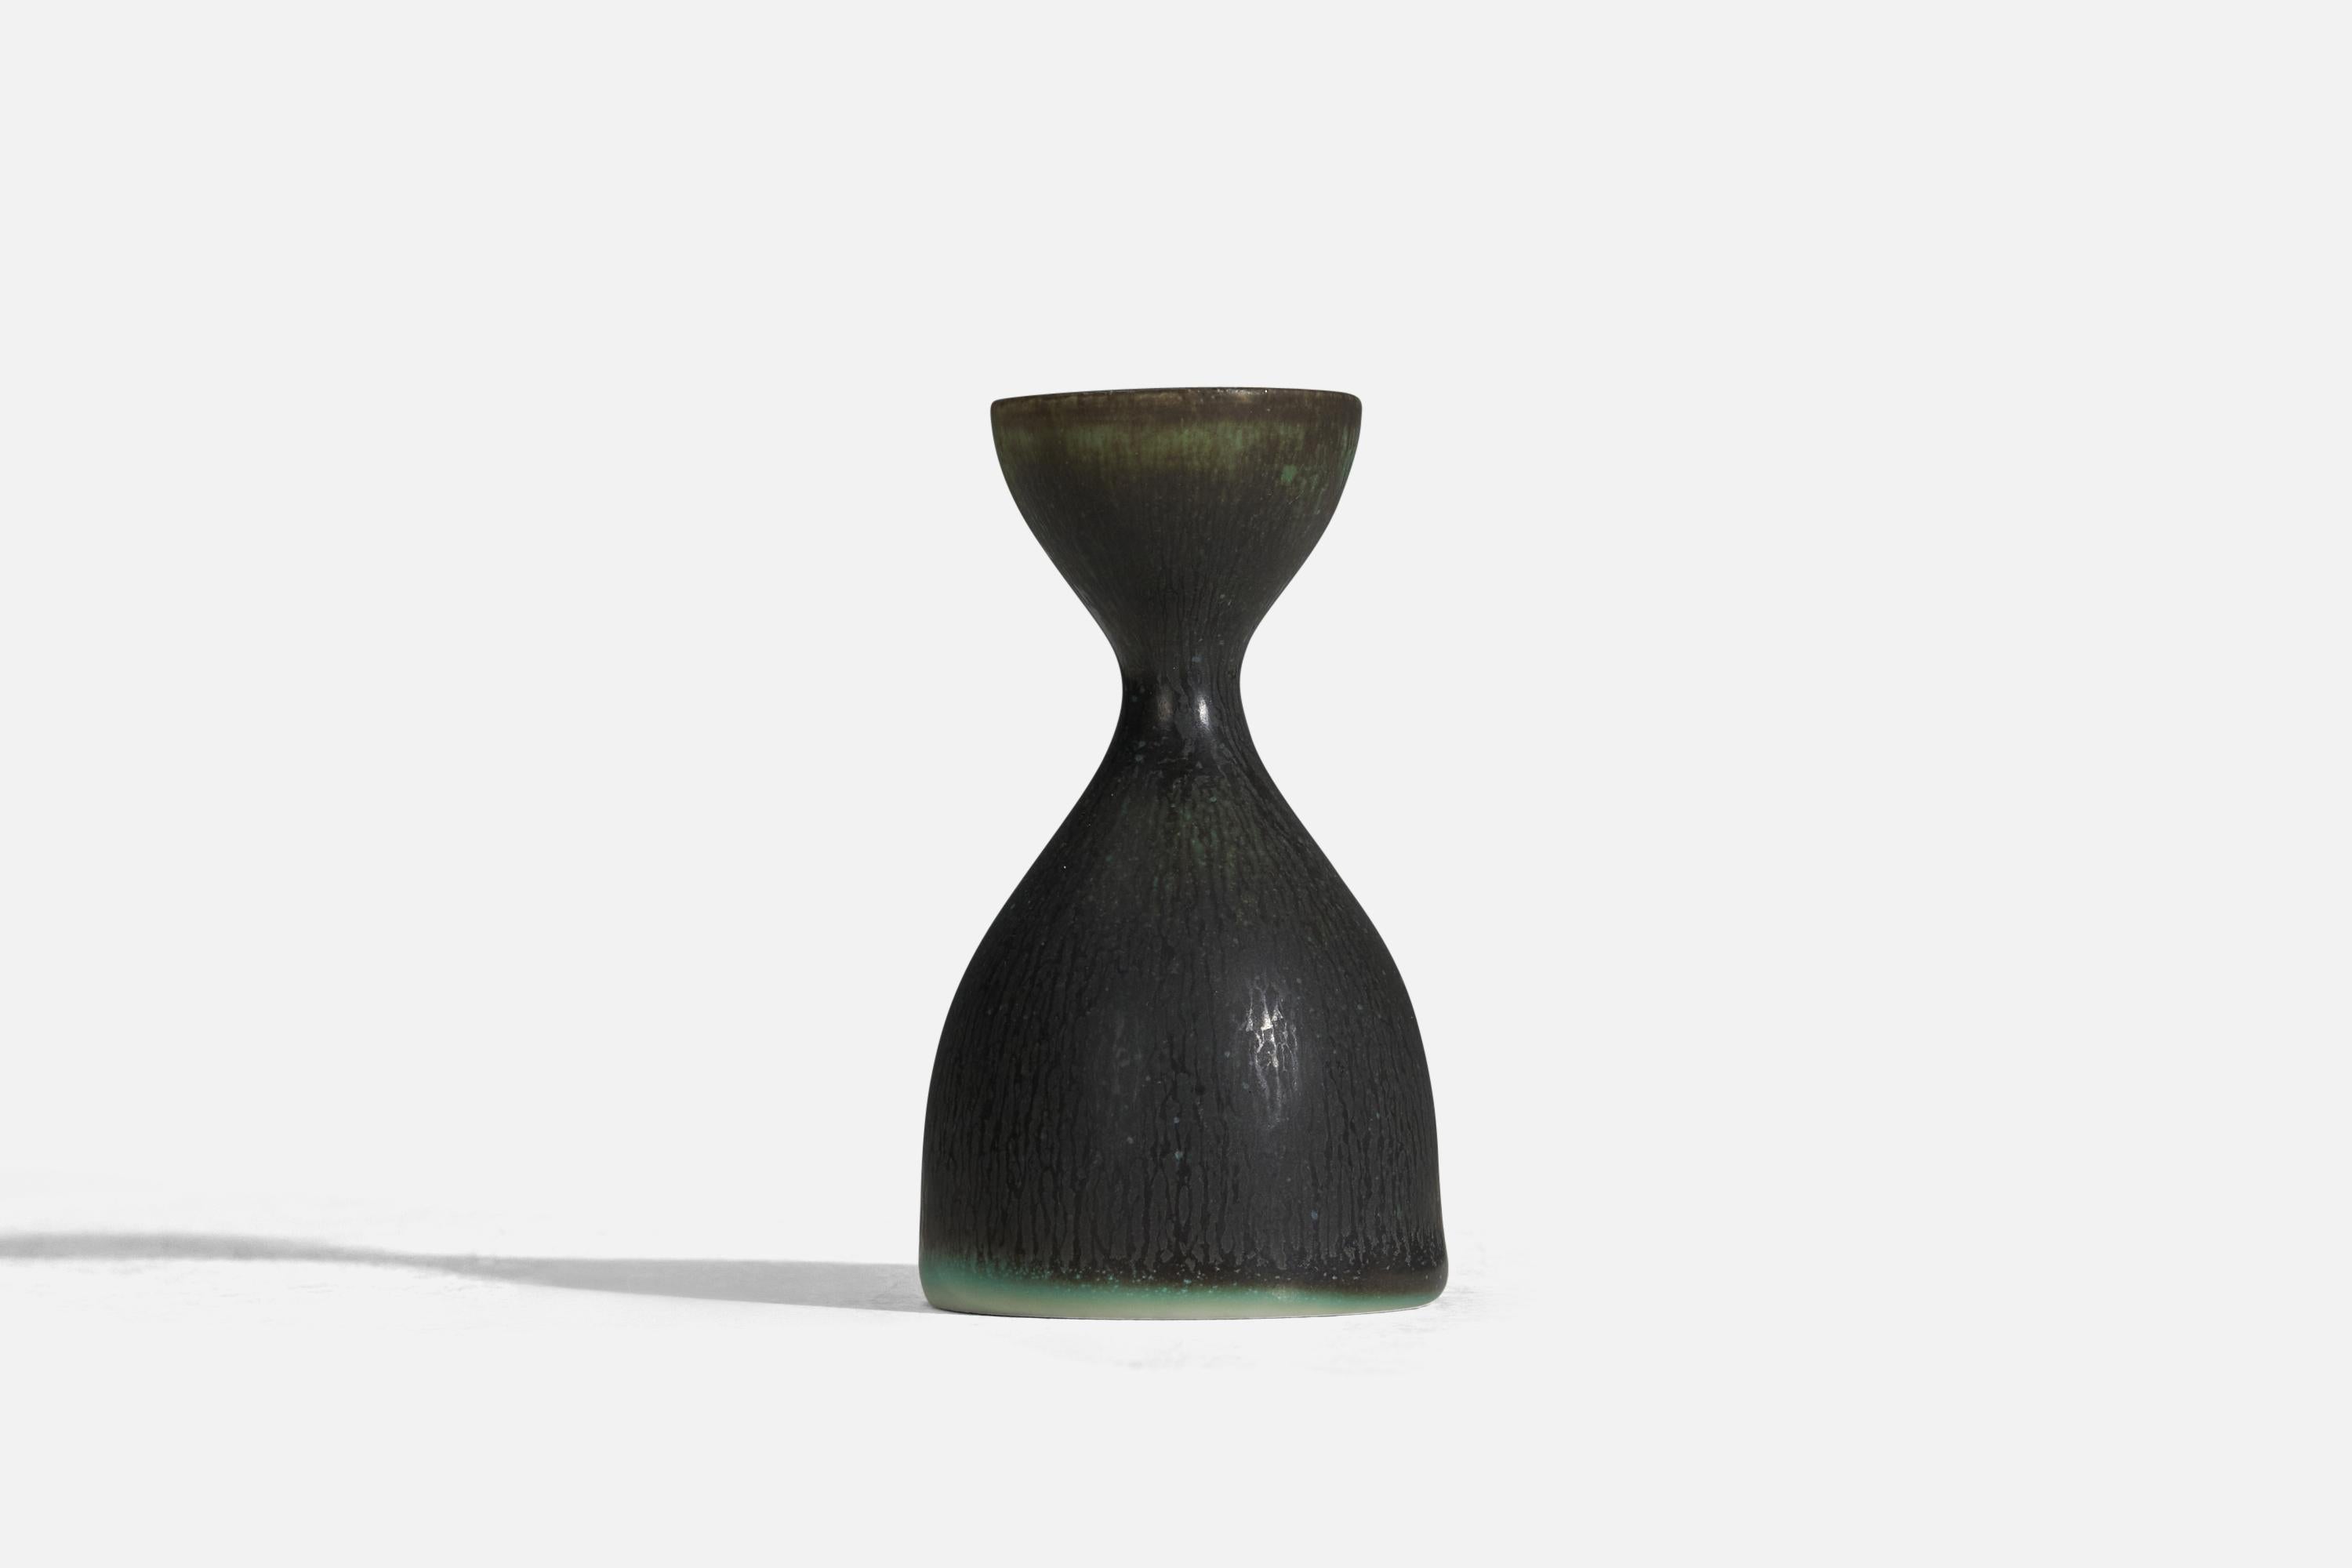 A green and black glazed stoneware vase designed by Carl-Harry Stålhane and produced by Rörstrand, Sweden, 1960s.